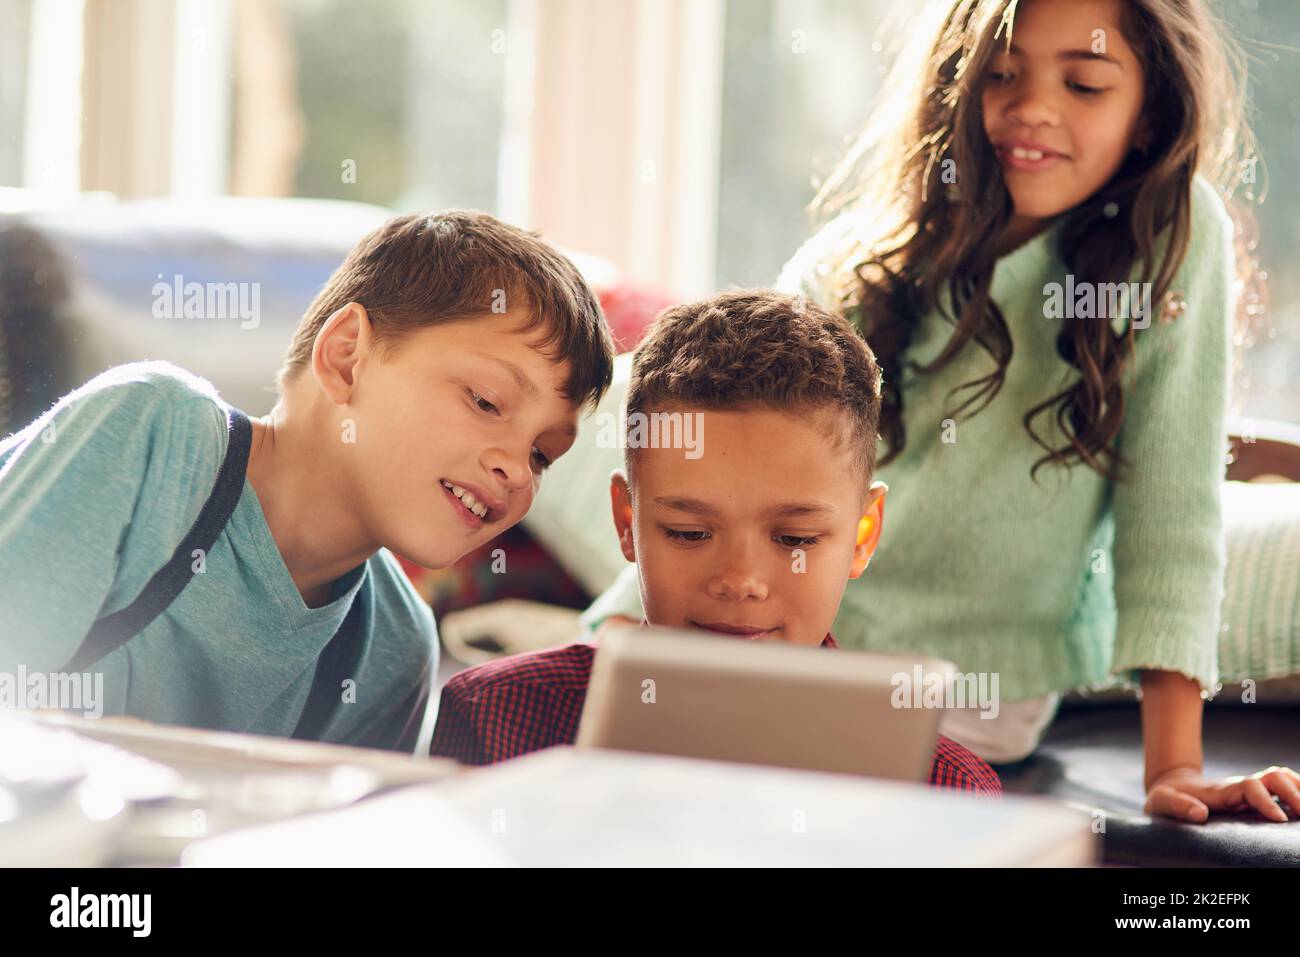 Keeping the kids busy with technology. Shot of young children using a digital tablet together at home. Stock Photo